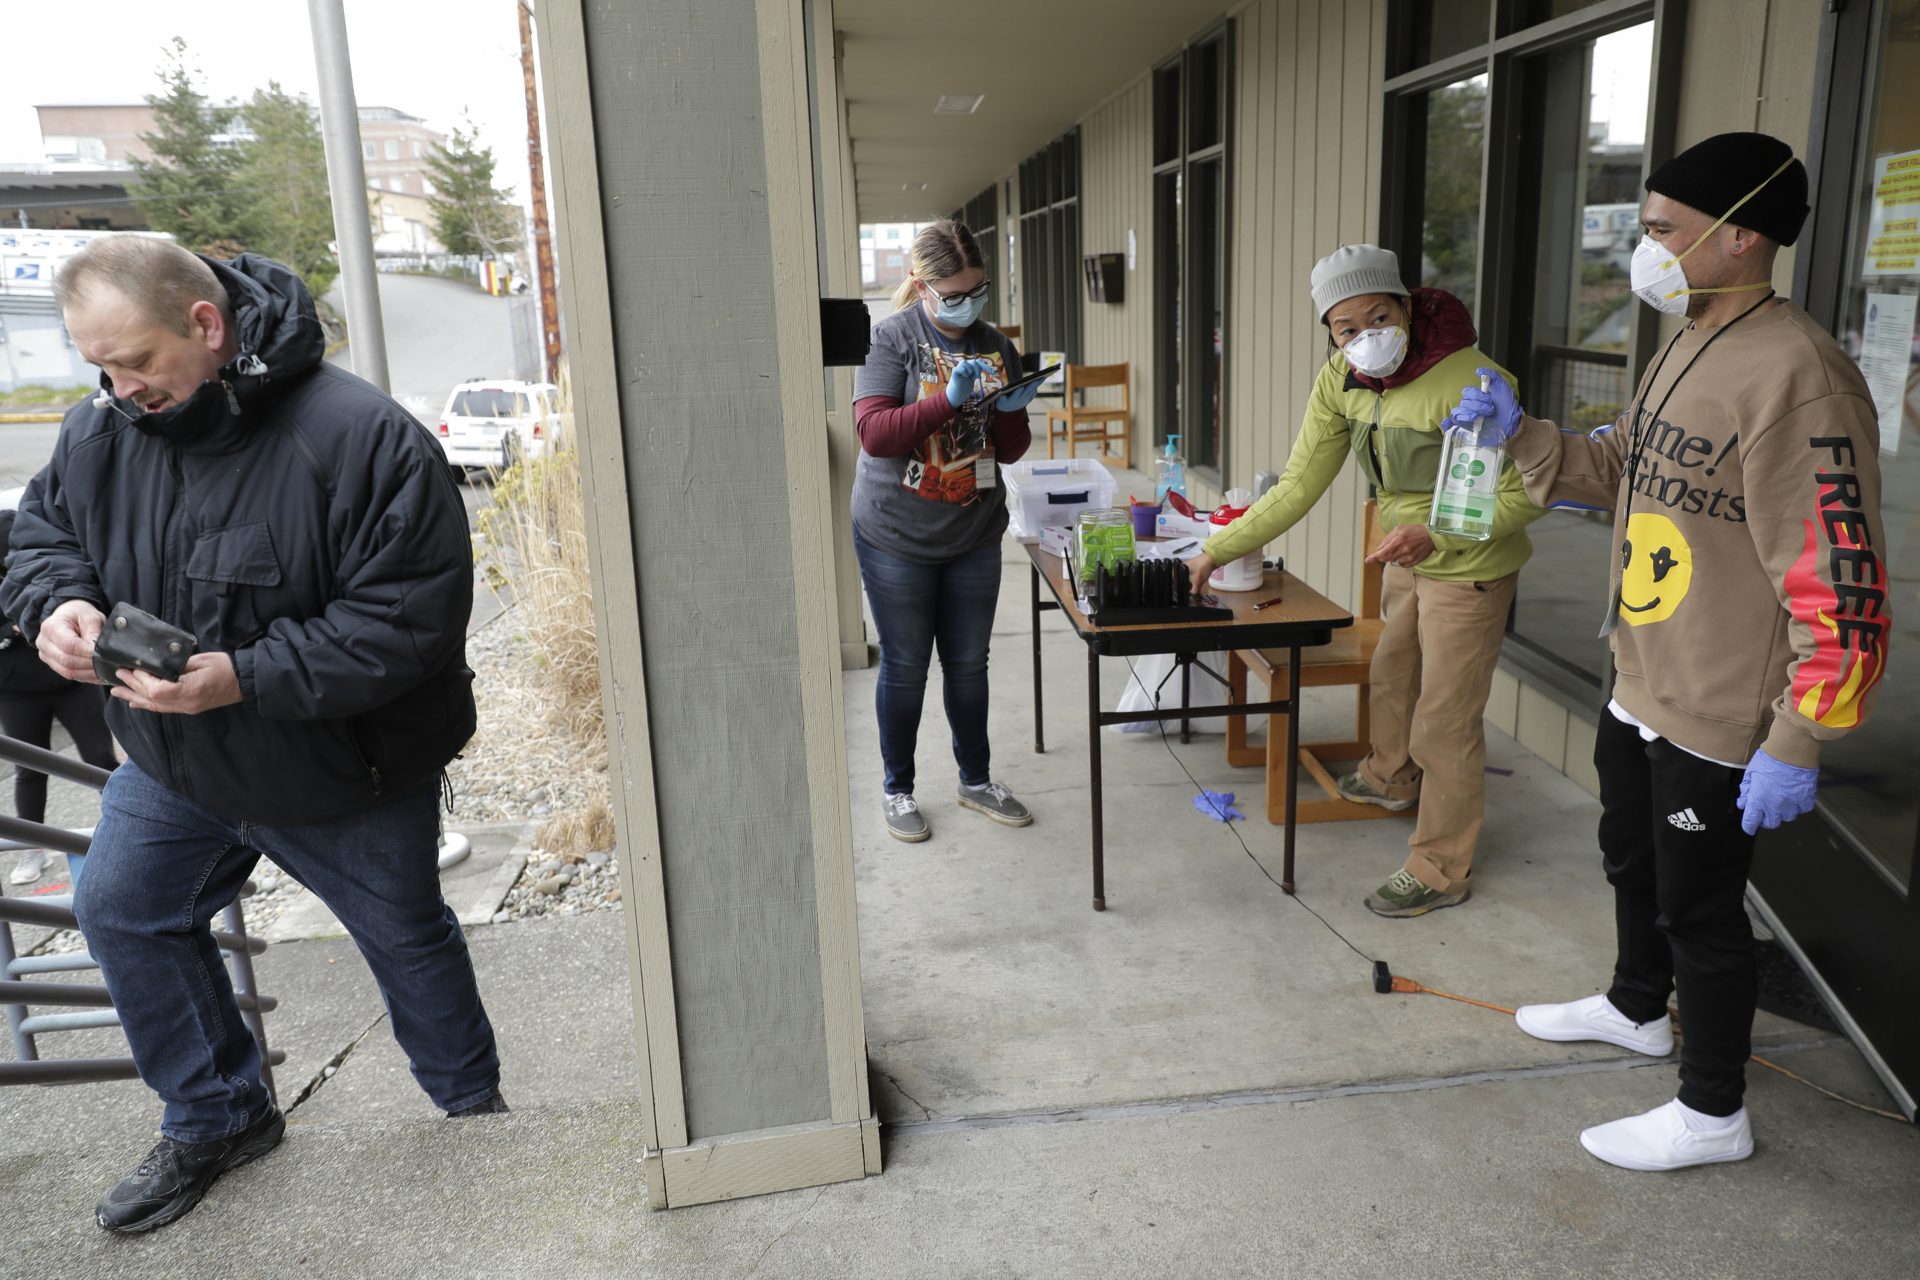 In this March 27, 2020 photo, Garrett McIntyre, left, arrives to pick up medication for opioid addiction at a clinic in Olympia, Wash., that is currently meeting patients outdoors and offering longer prescriptions in hopes of reducing the number of visits and the risk of infection due to the outbreak of the new coronavirus.